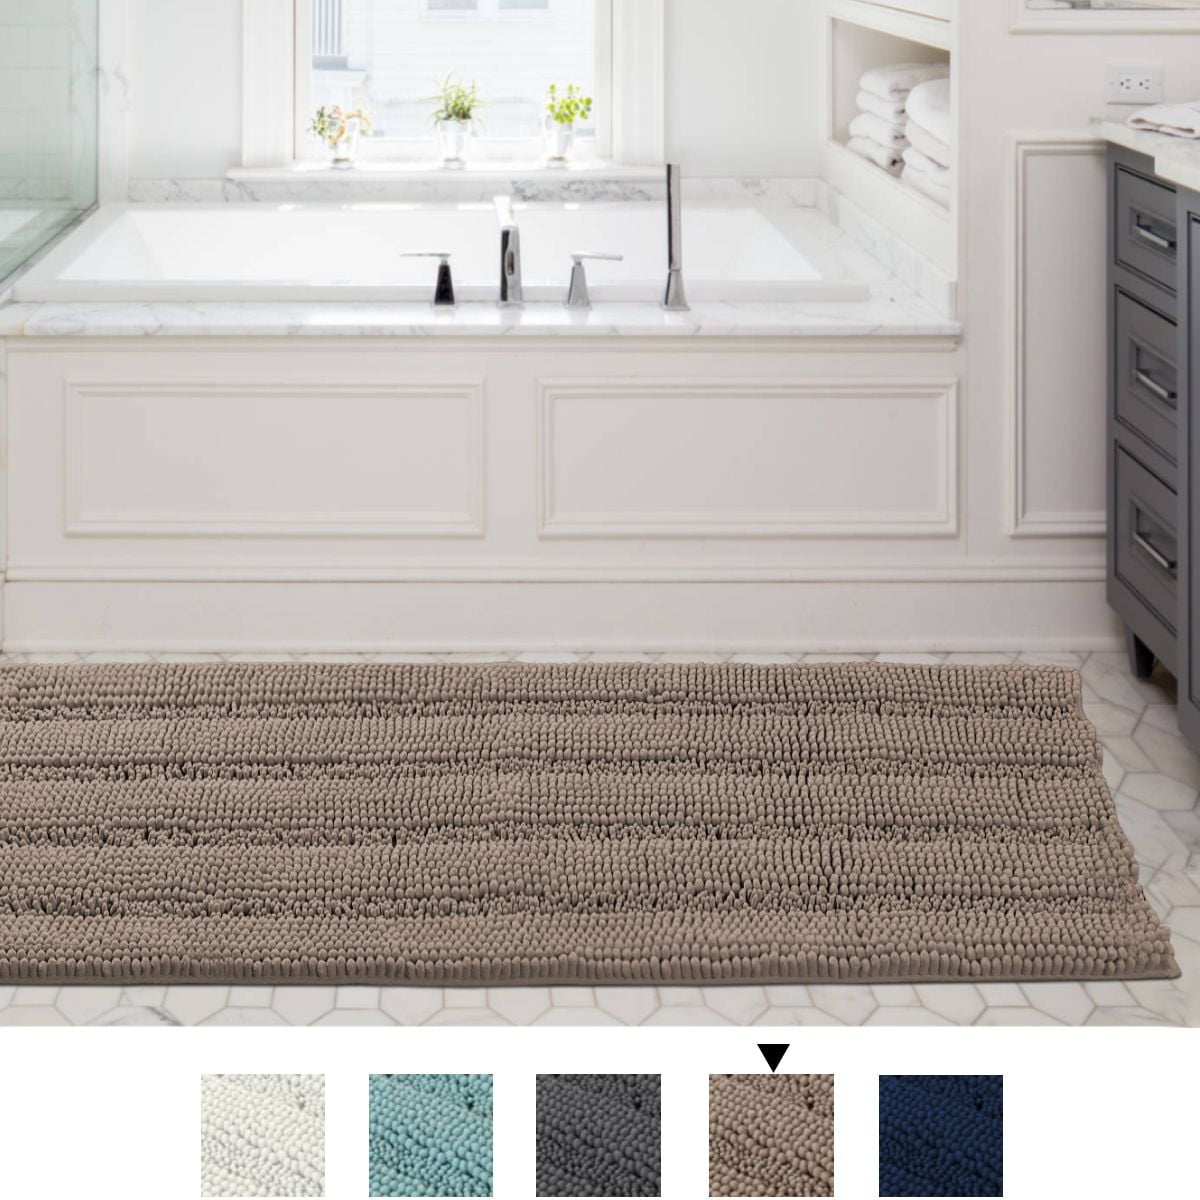 0.8/1/1.2/1.4M Wide FF Hallway Runner Thick Non-Slip Hallway Kitchen Runner Rugs Color : Style B, Size : 0.8×3m Modern Floral Washable 3D Long Runners for Hotel Entrance 